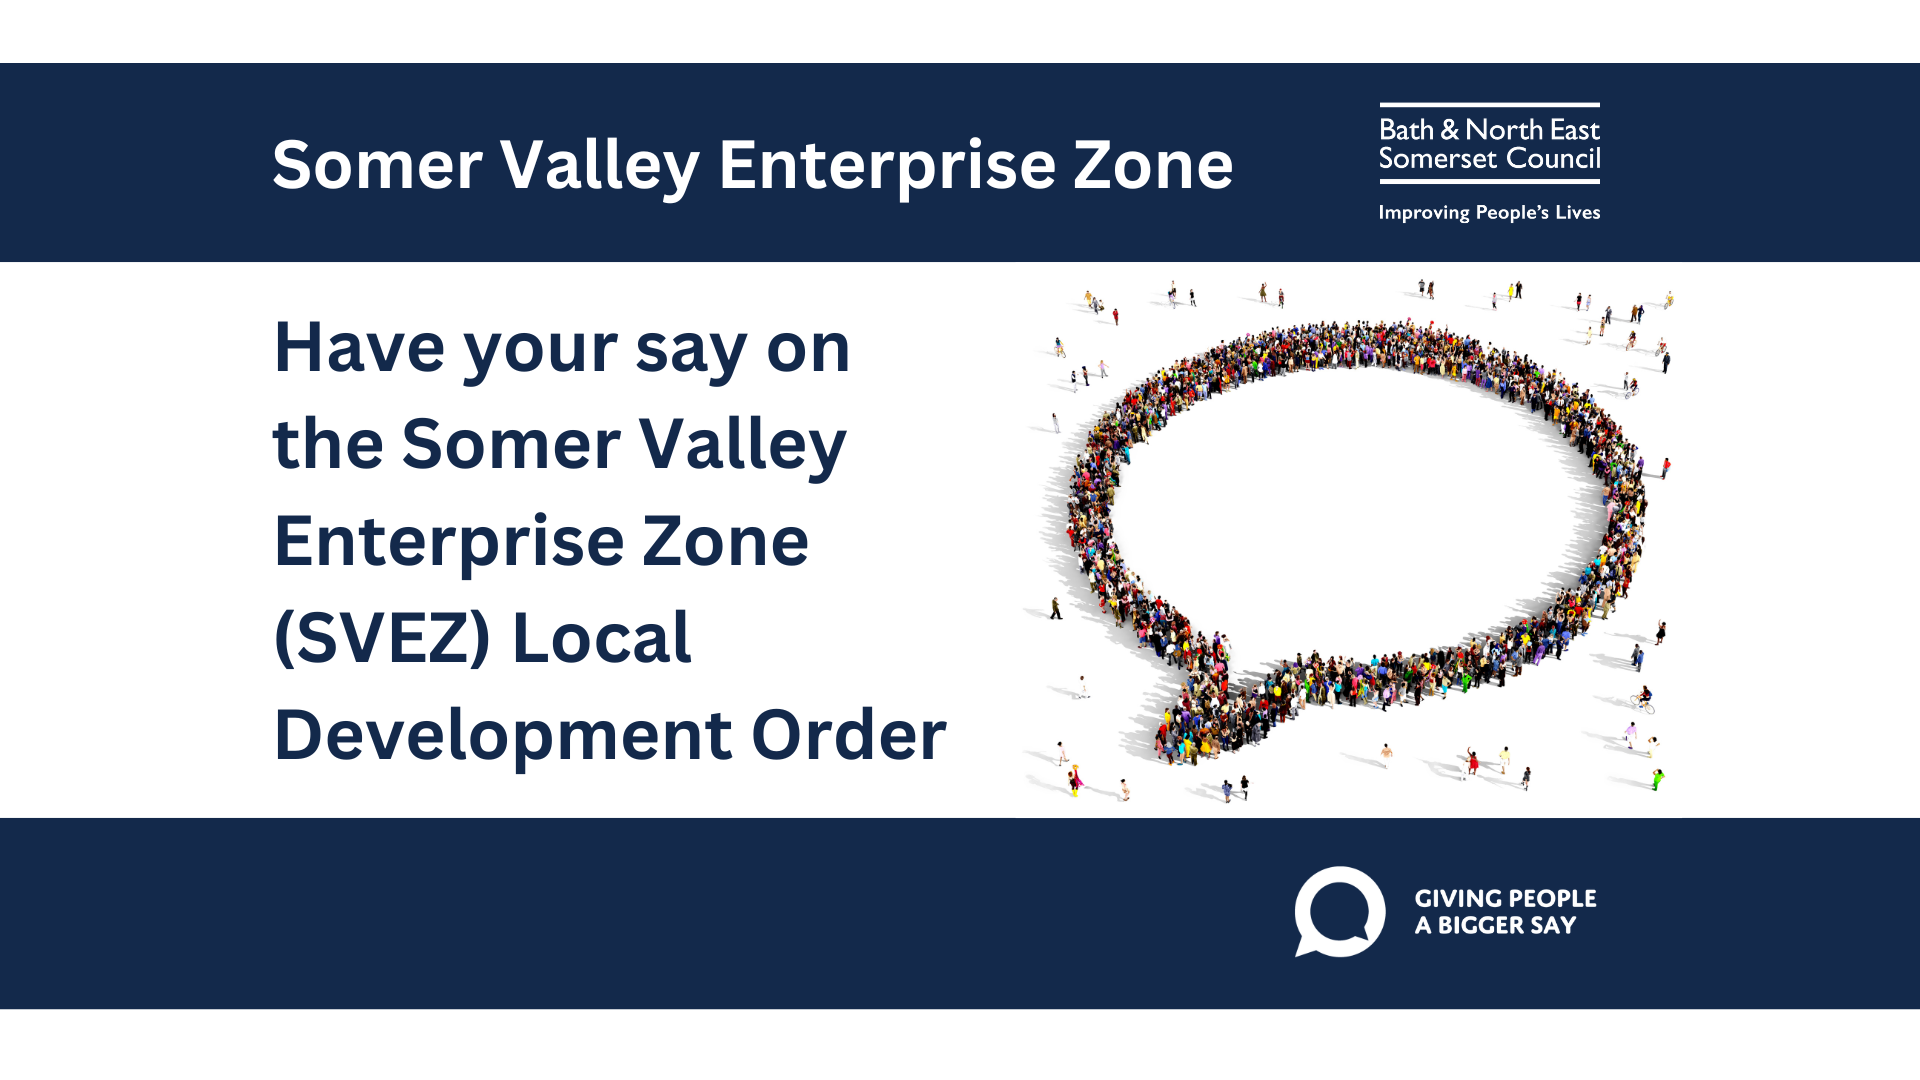 Revised plans to facilitate development of the Somer Valley Enterprise Zone go out to consultation